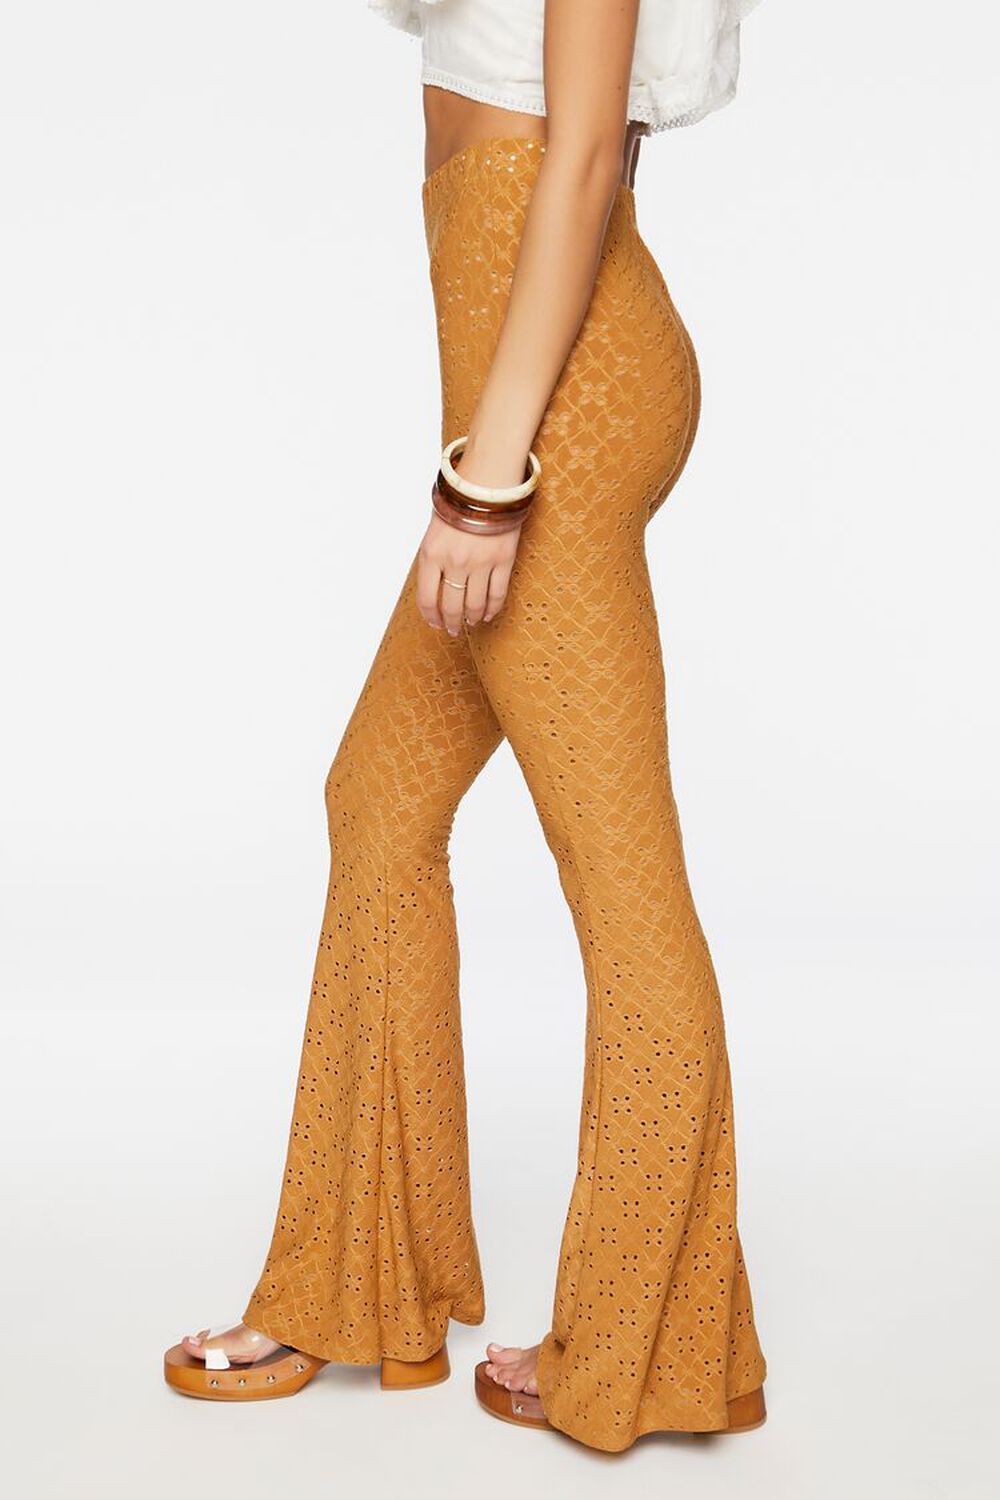 BROWN SUGAR Pointelle High-Rise Flare Pants, image 3